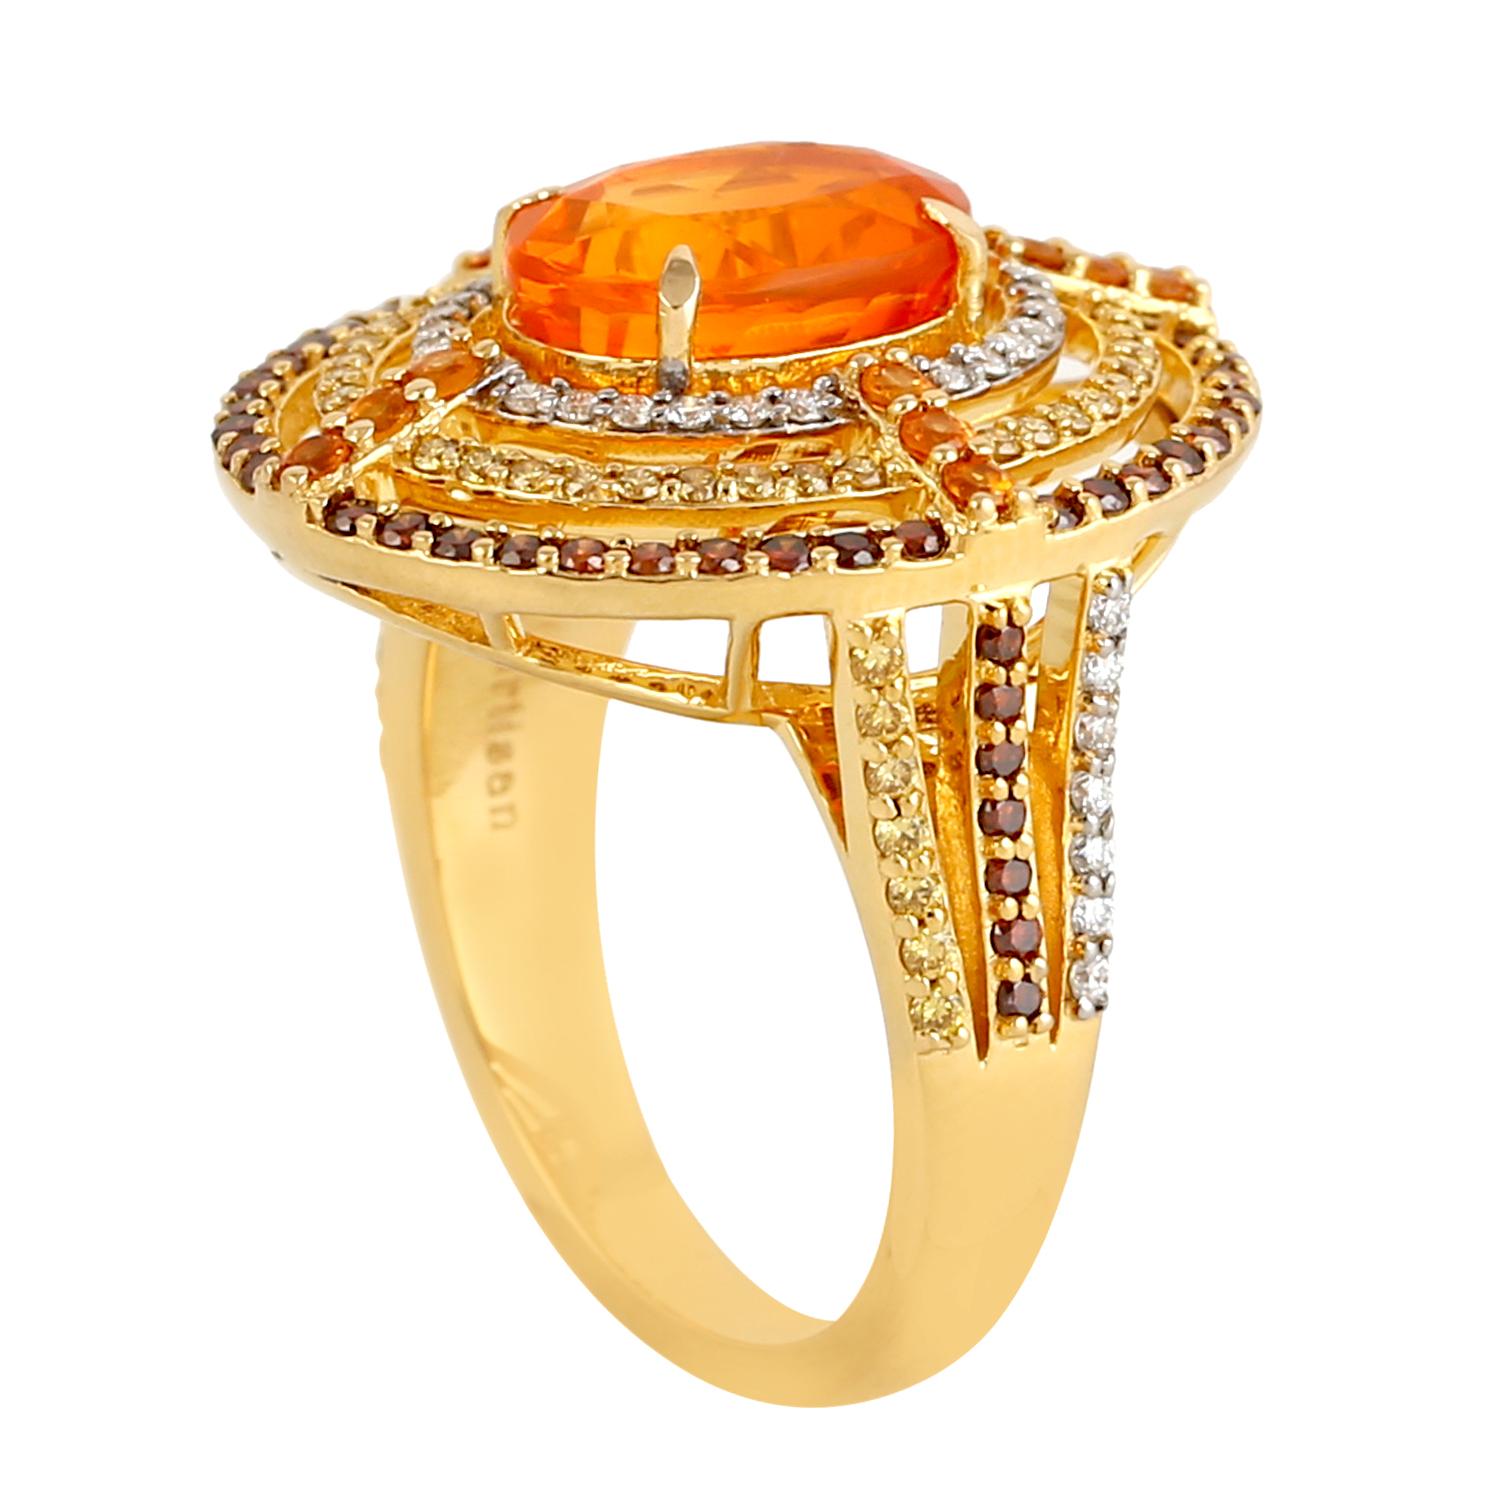 Contemporary Fire Opal Cocktail Ring Surrounded By Mandarin Garnet & Diamonds In 18k Gold For Sale